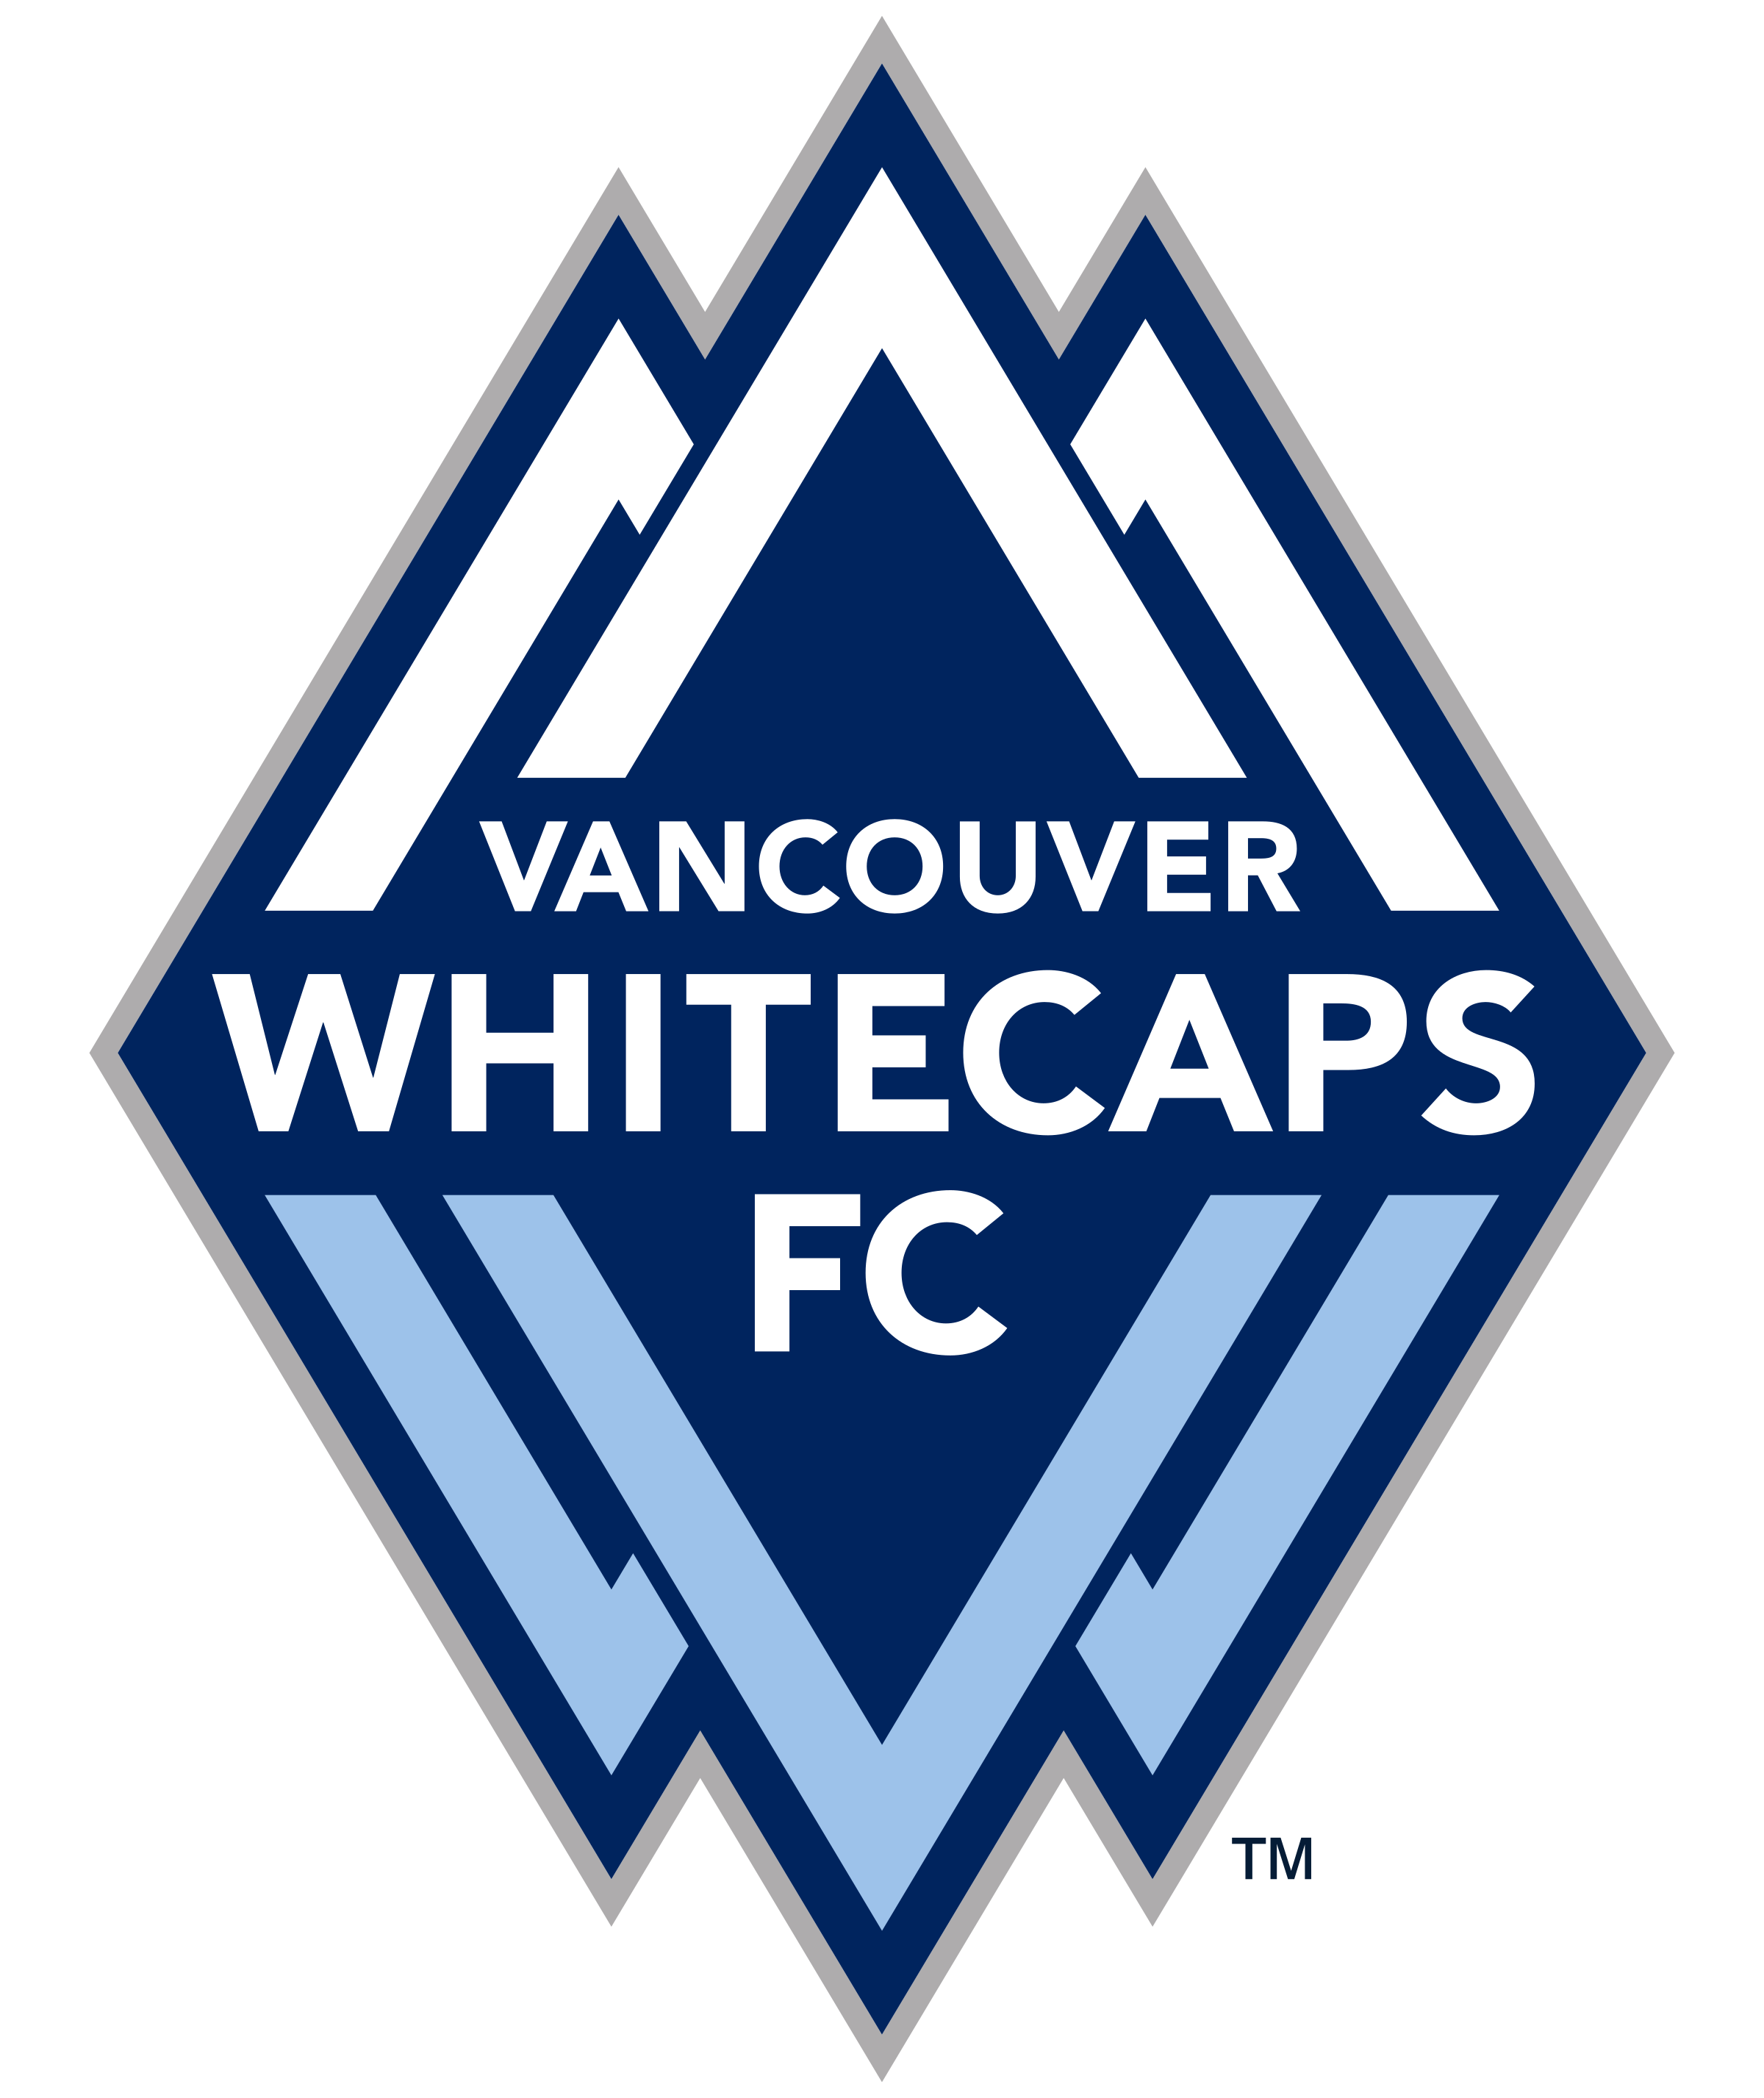 Vancouver Whitecaps Fc PNG - 111393